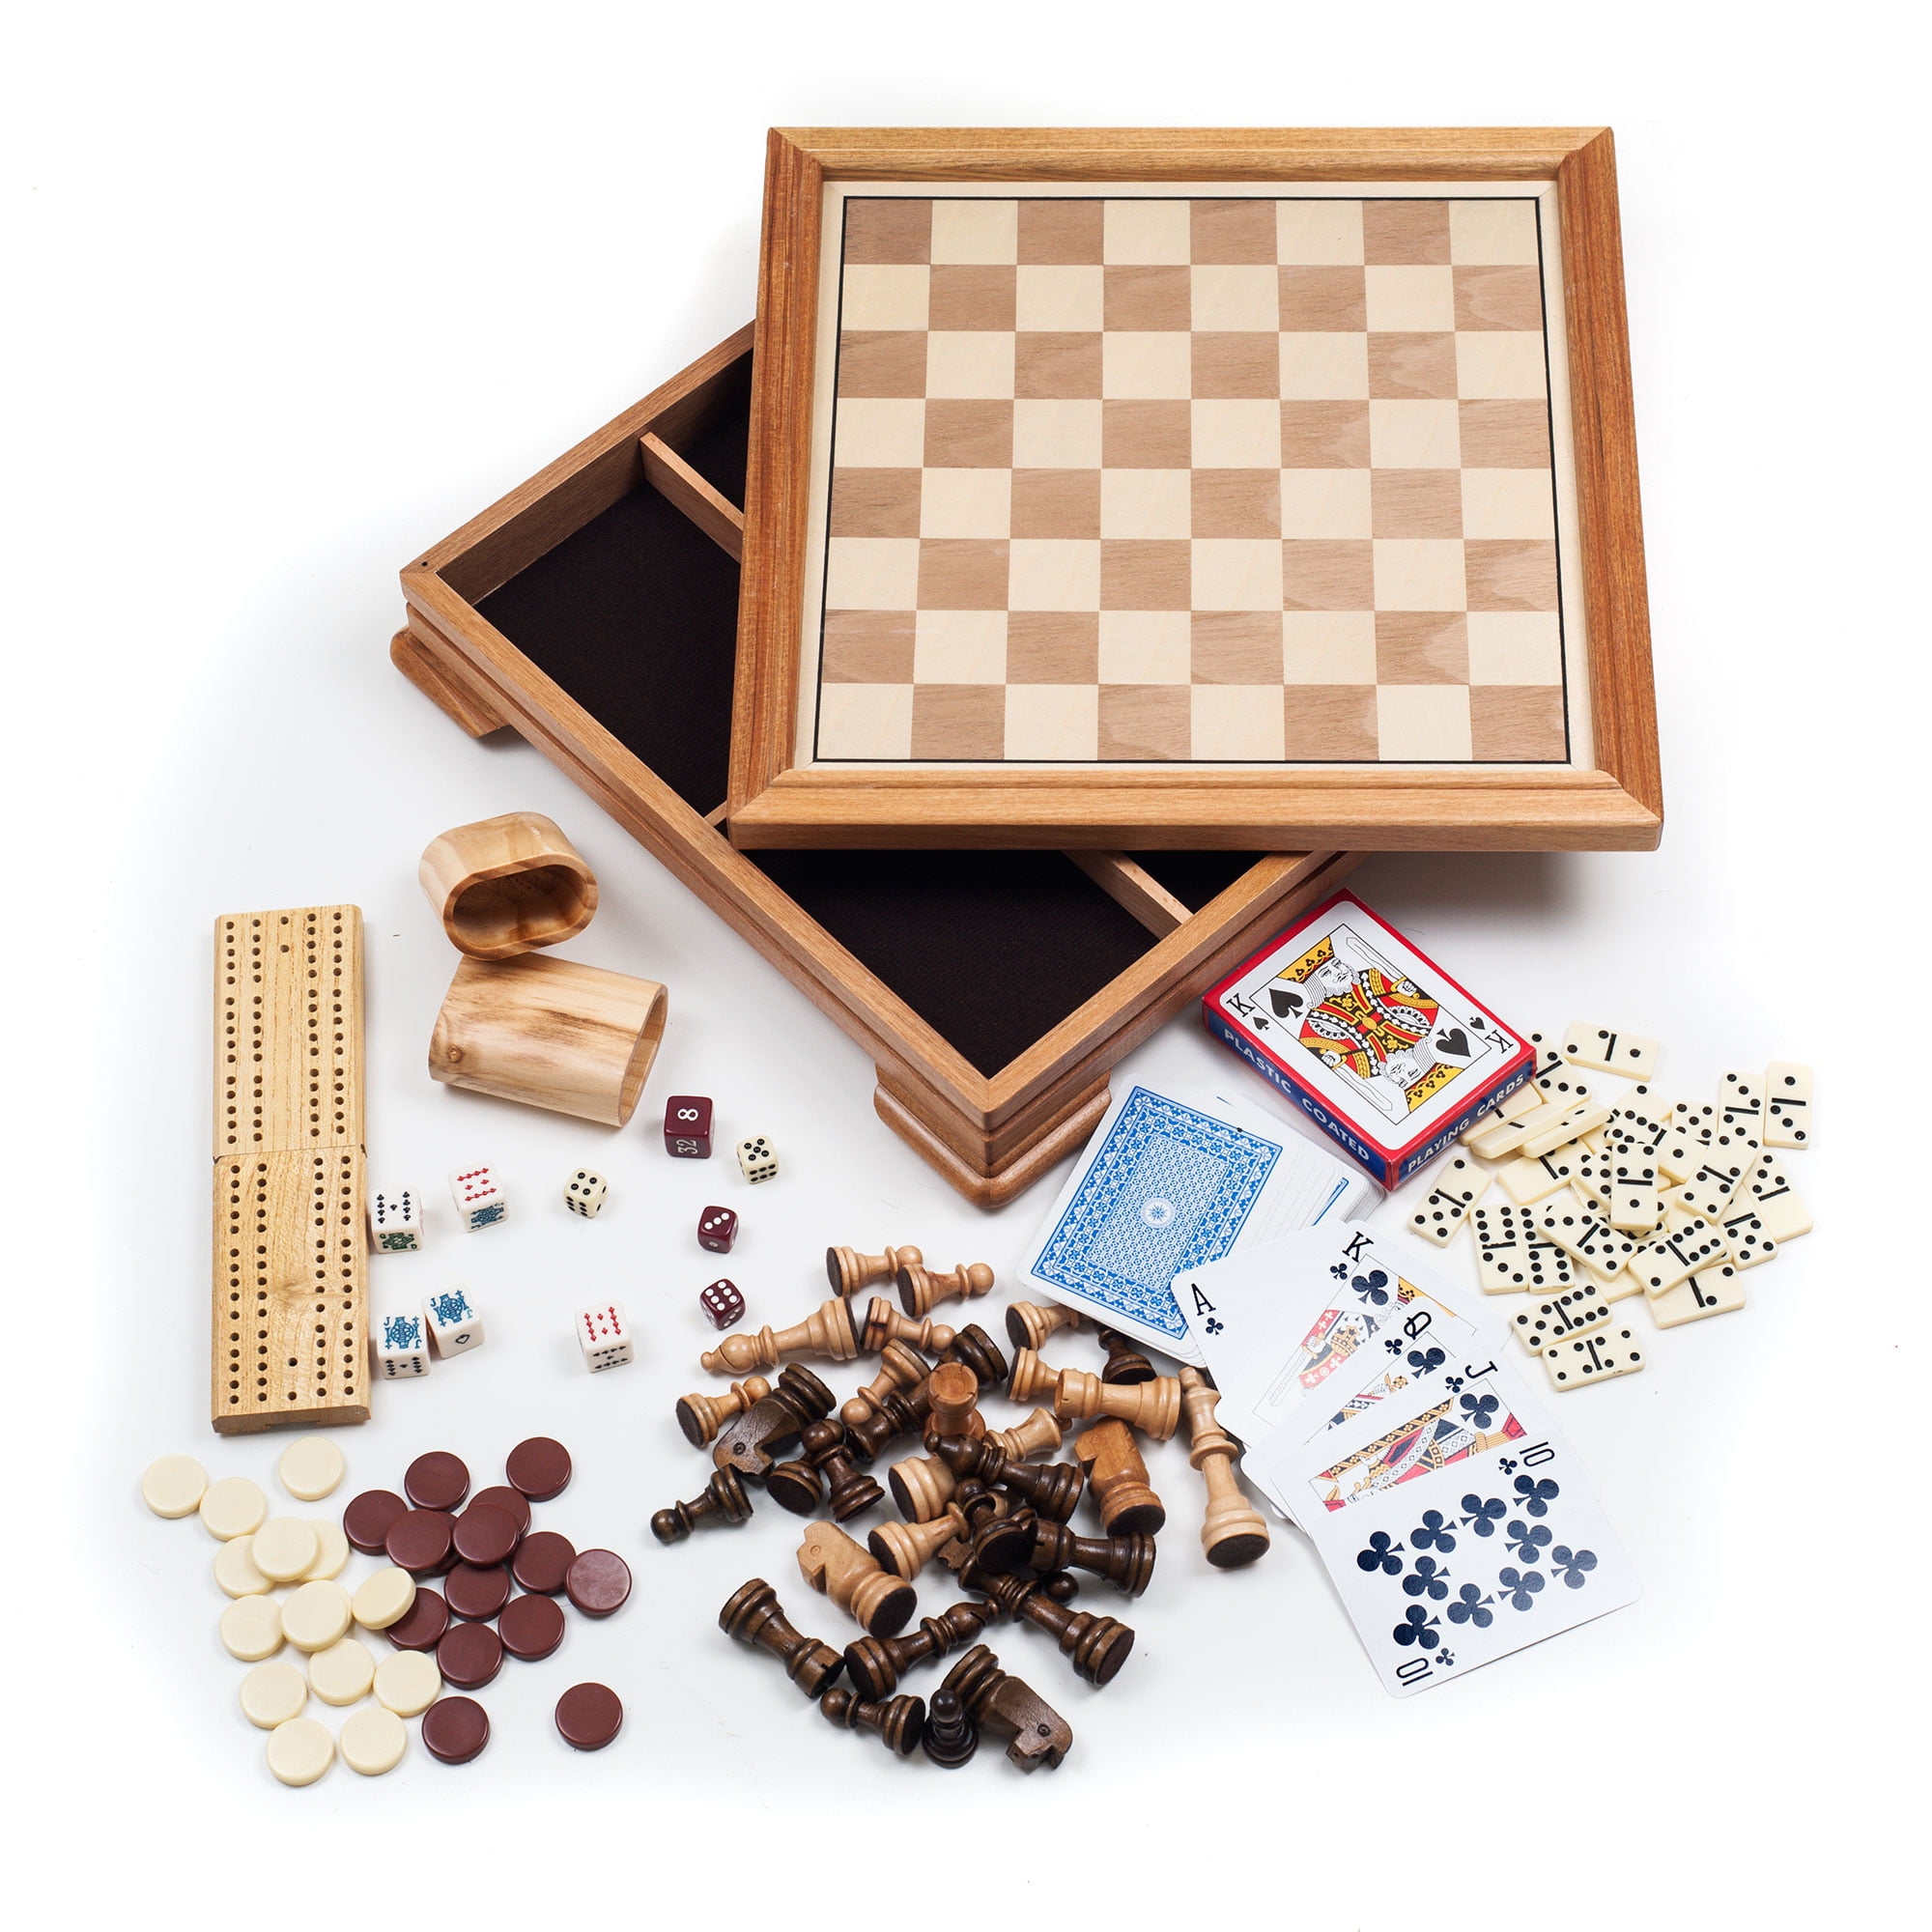 Deluxe 7-in-1 Game Set - Chess, Checkers, Backgammon, Cribbage, Dominoes,  Play Cards by Hey! Play!